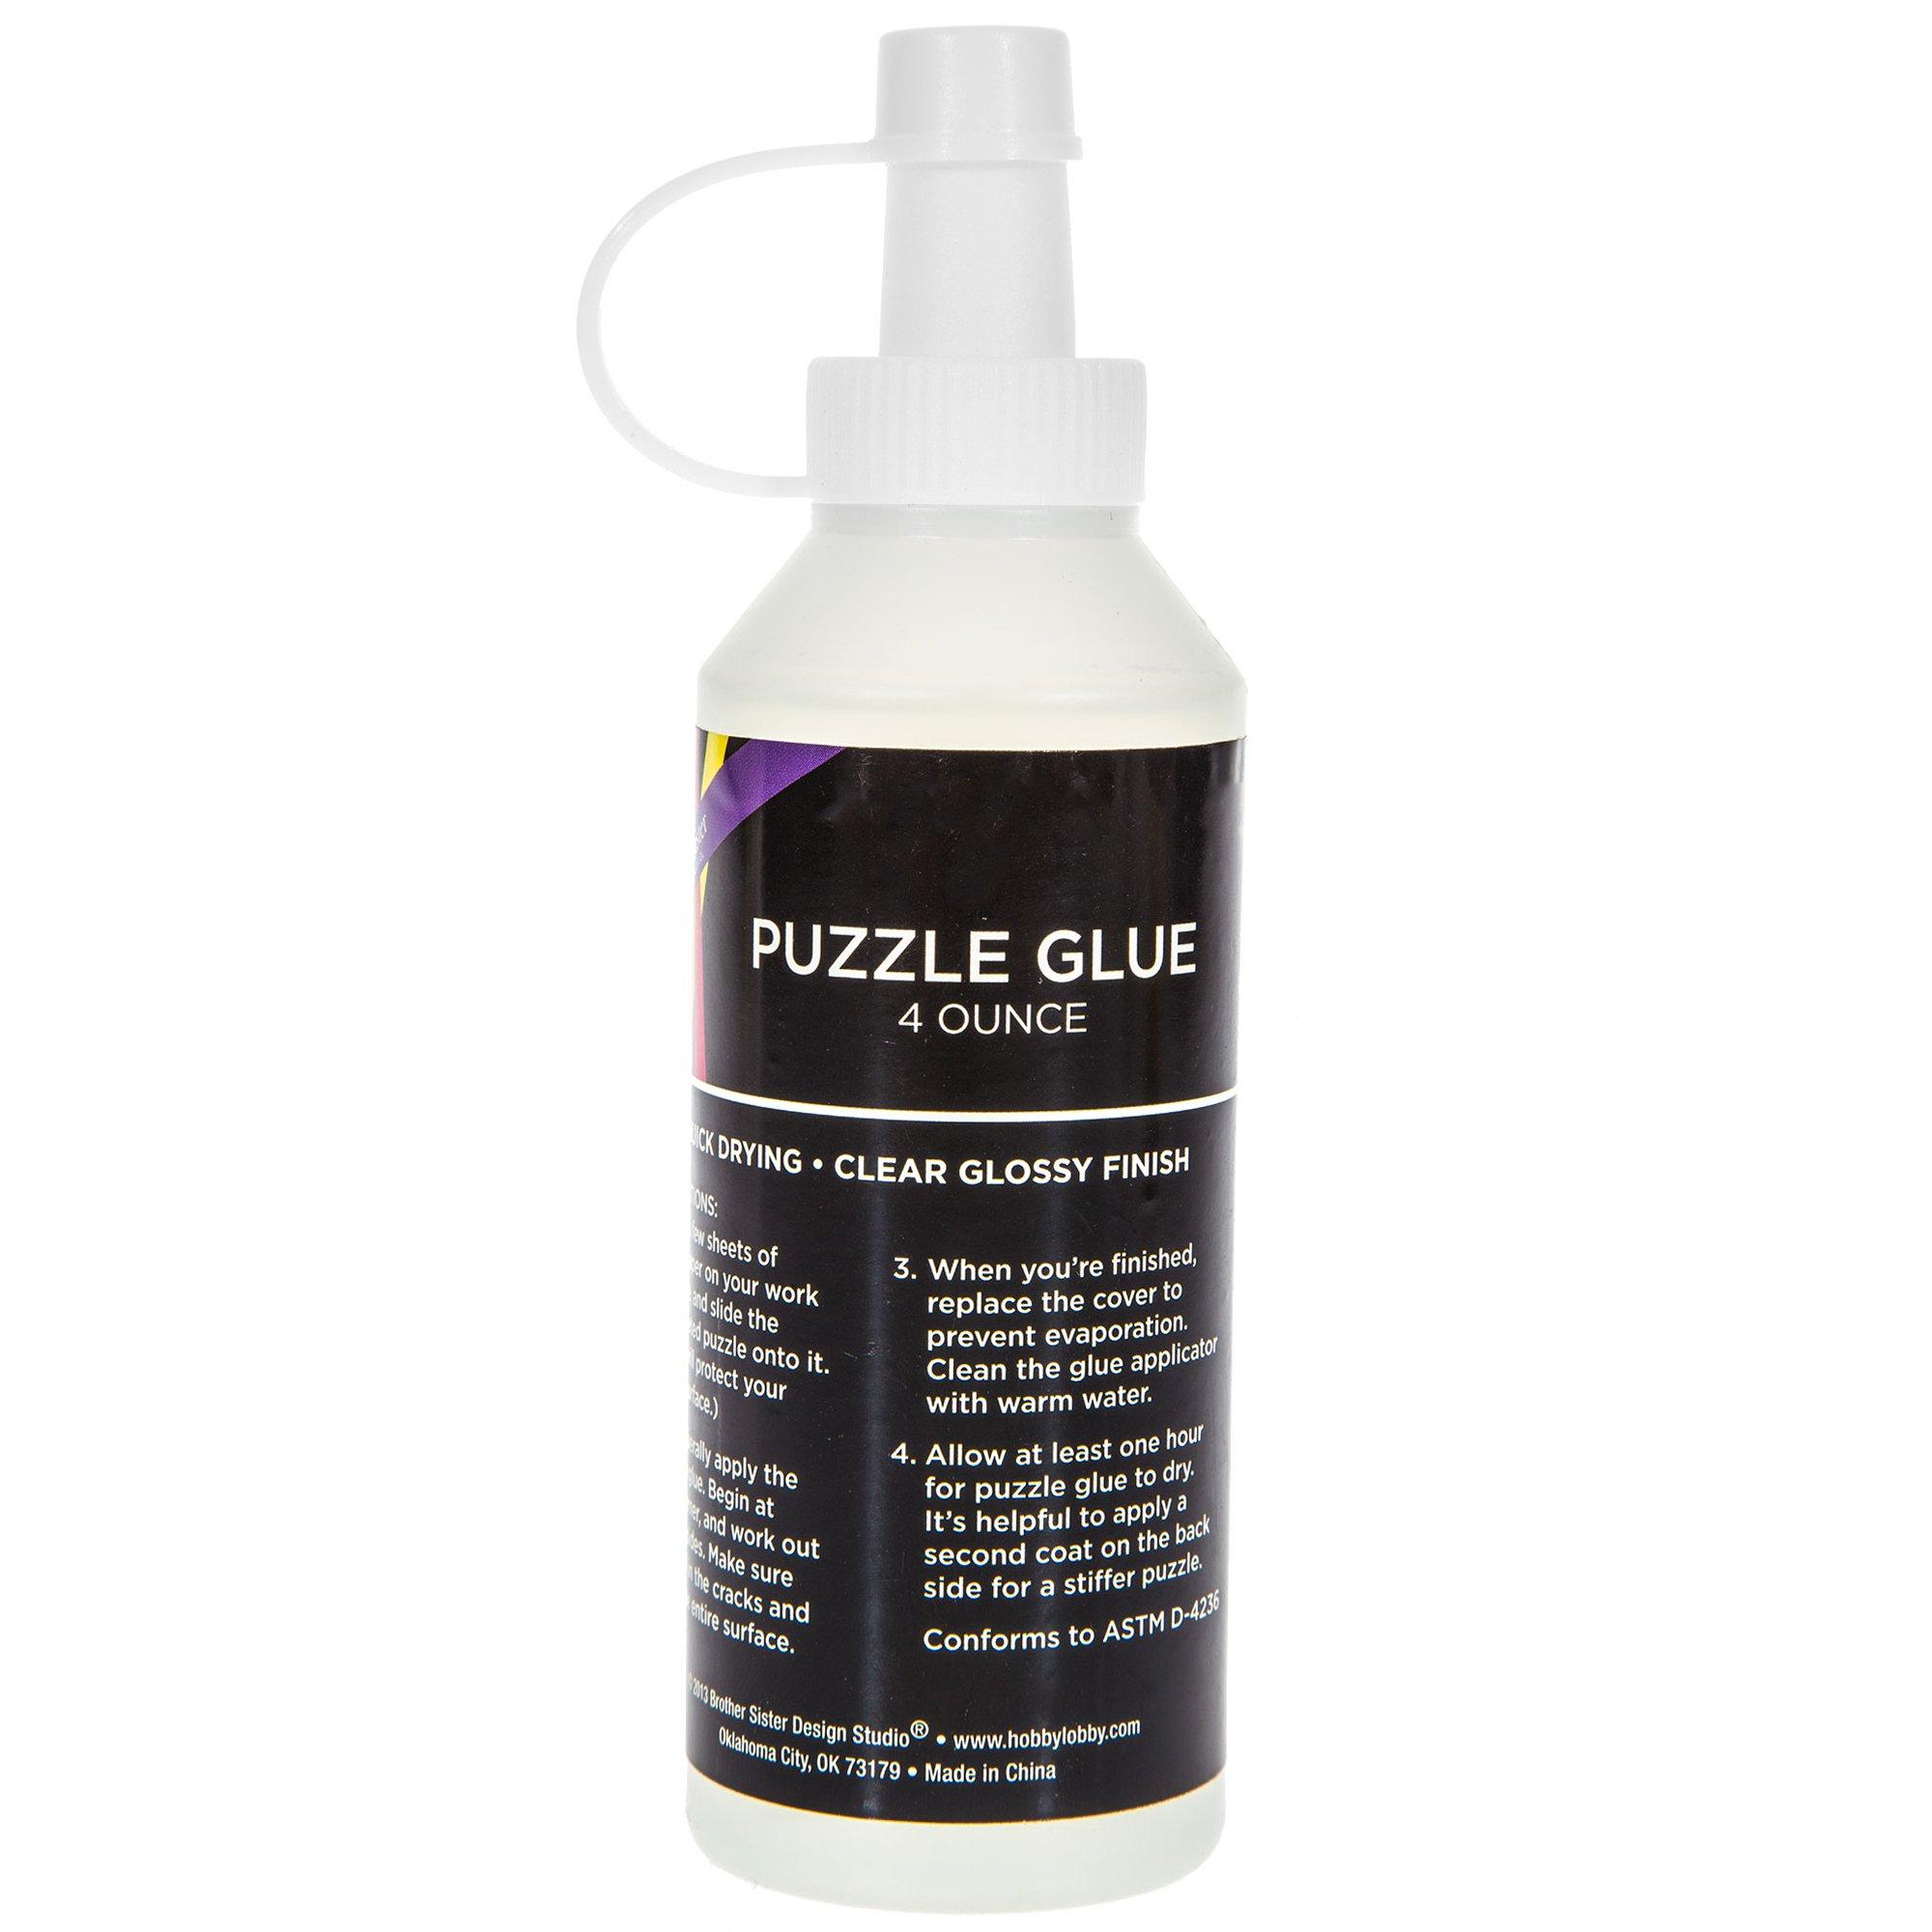 PUZZLE GLUE & GO! - THE TOY STORE